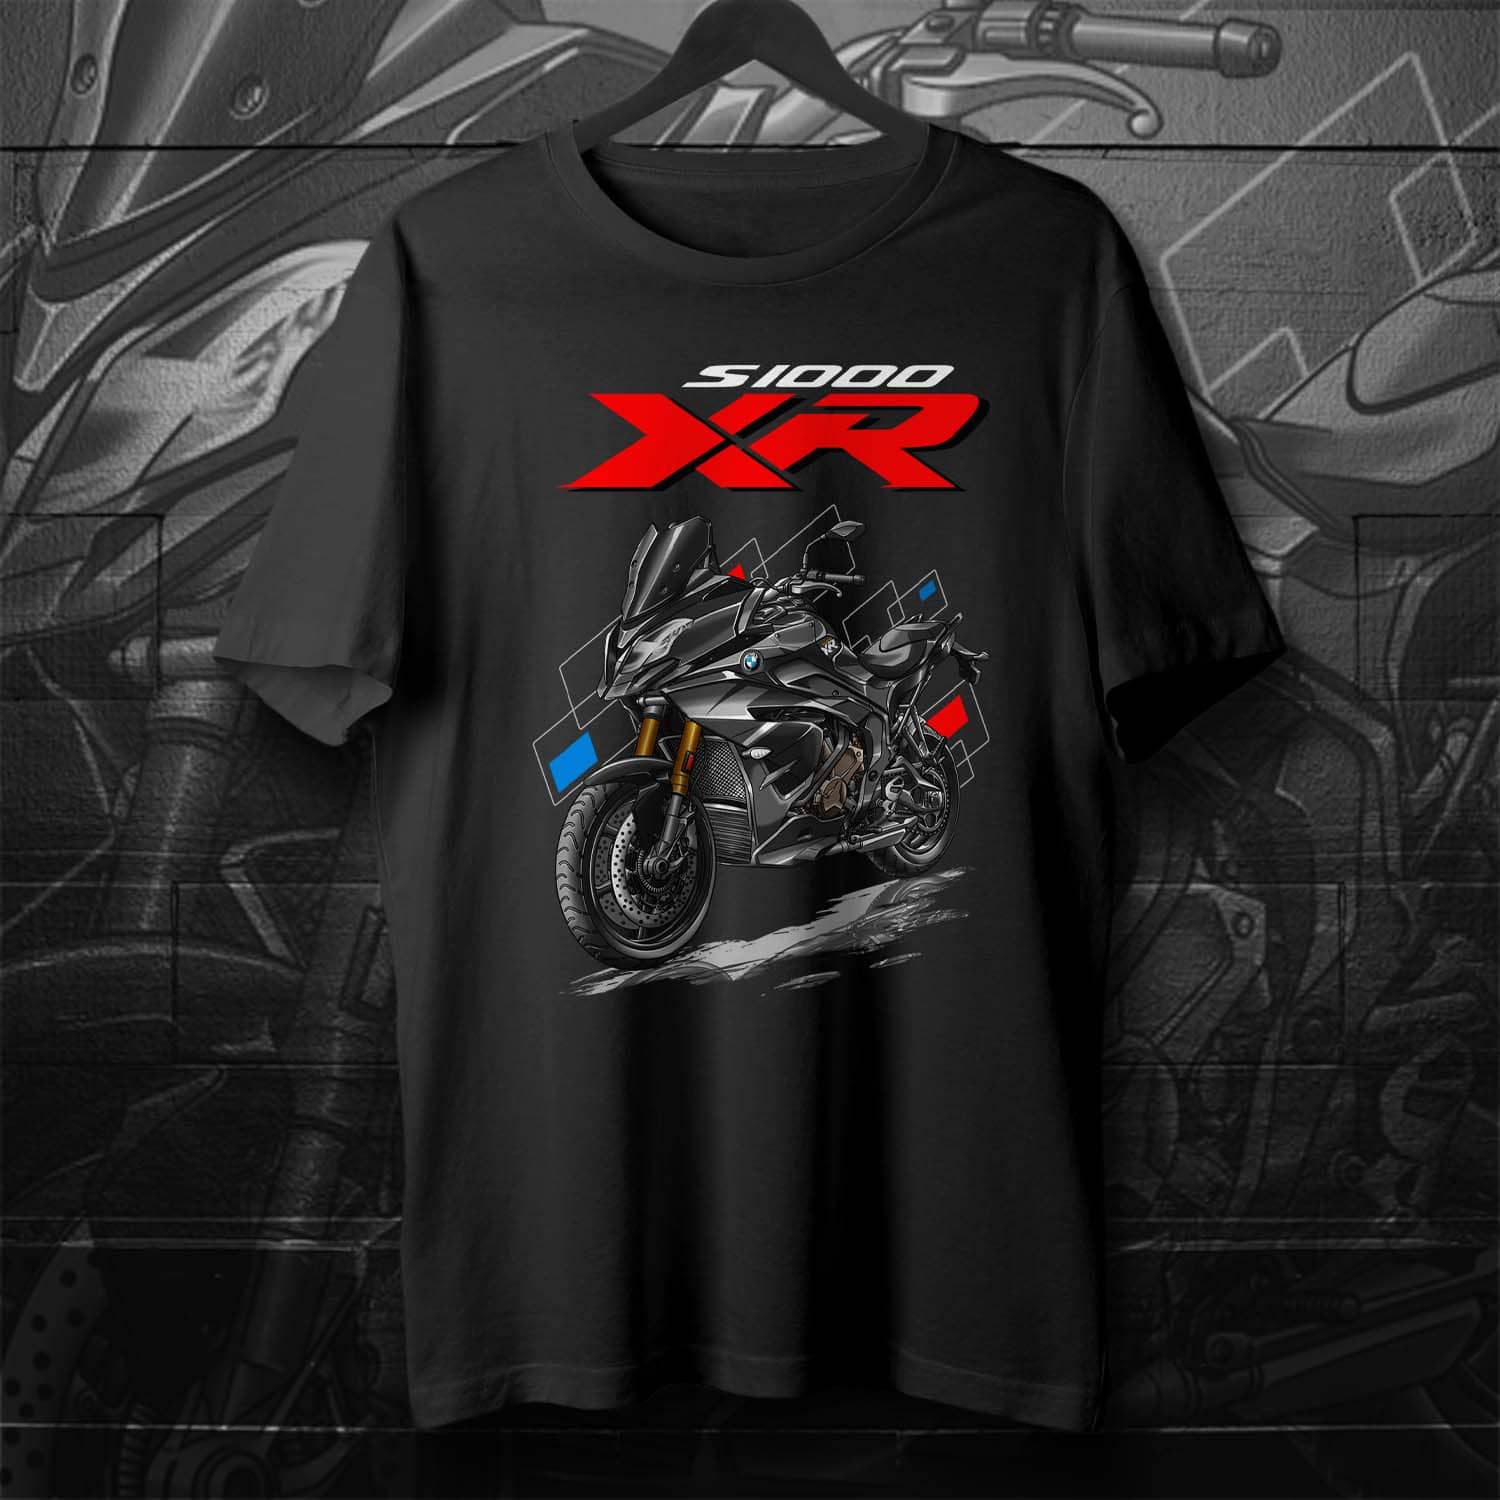 BMW Motorrad S1000XR T-shirt for Motorcycle Enthusiasts